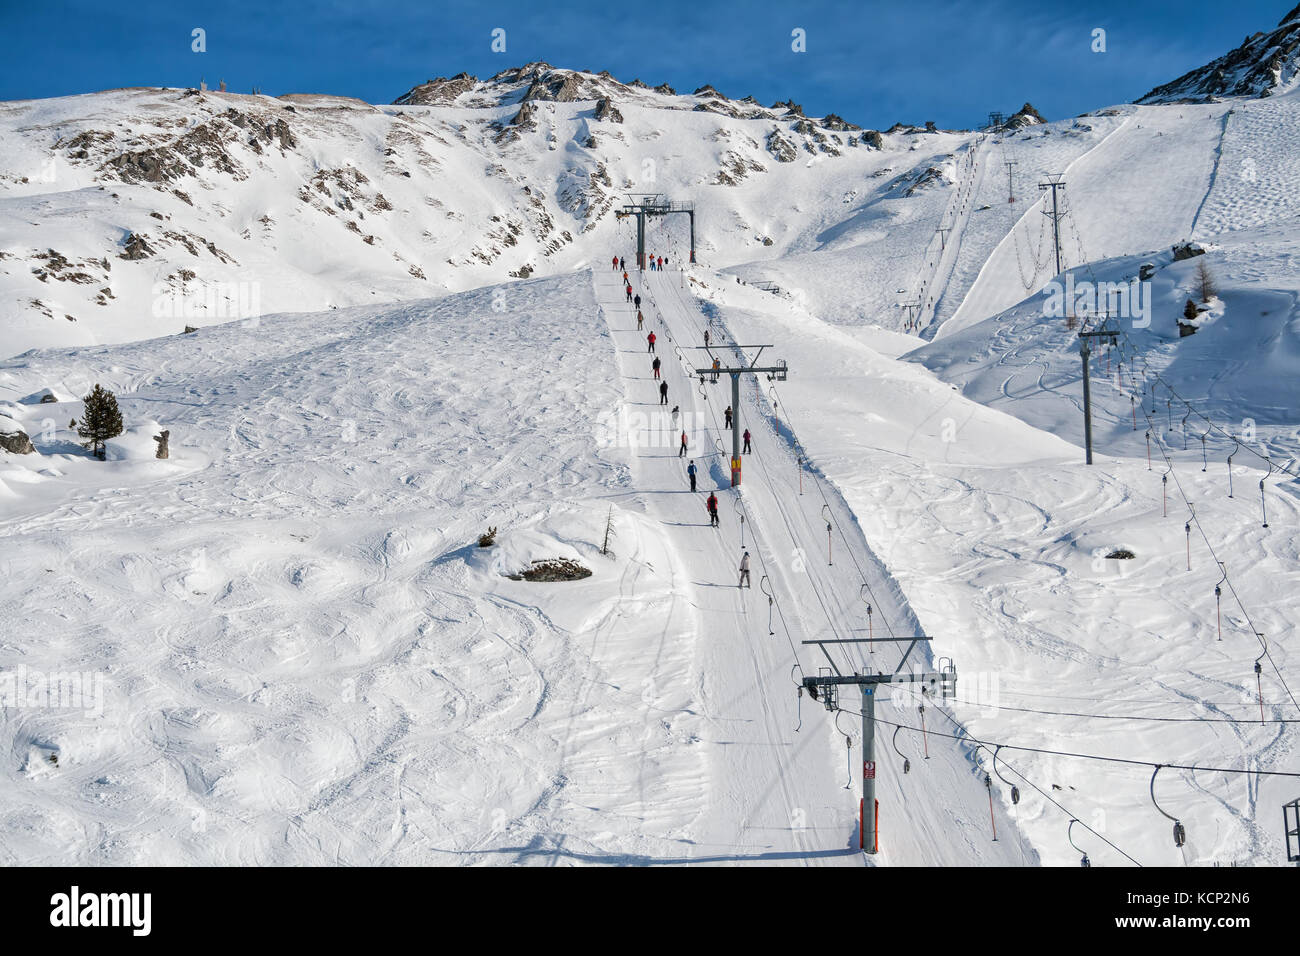 Ski resort in the Swiss Alps. Skiers ascend on rope tow up Stock Photo